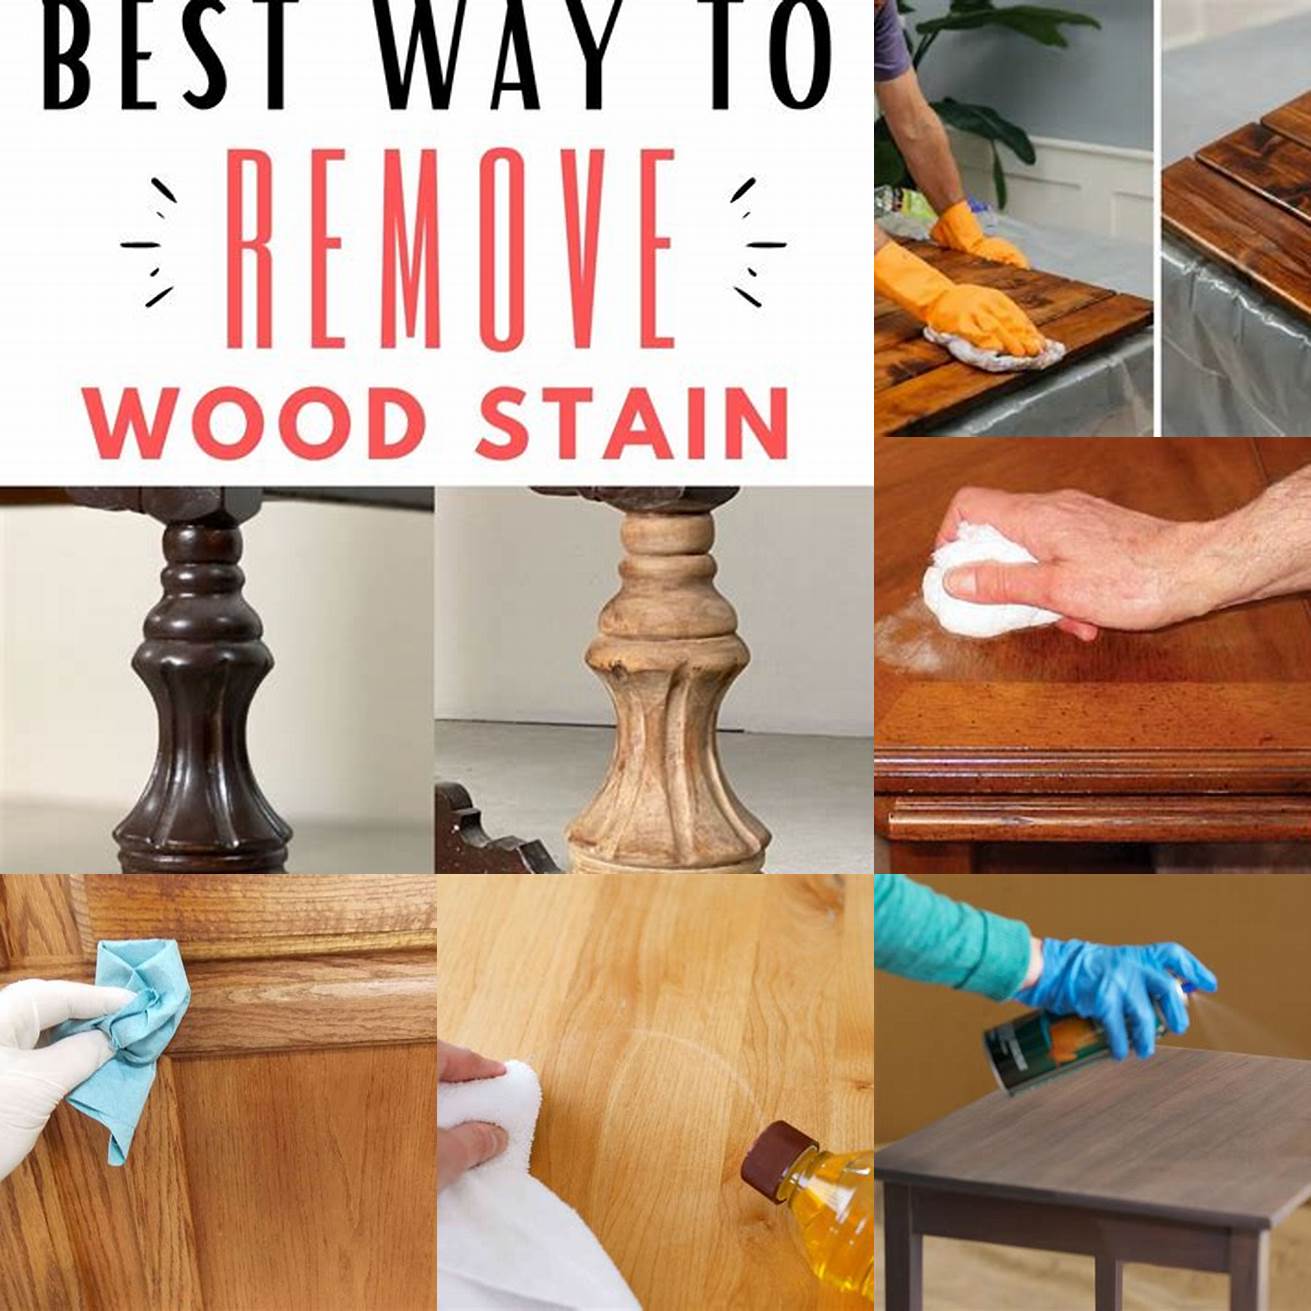 Removing Excess Stain